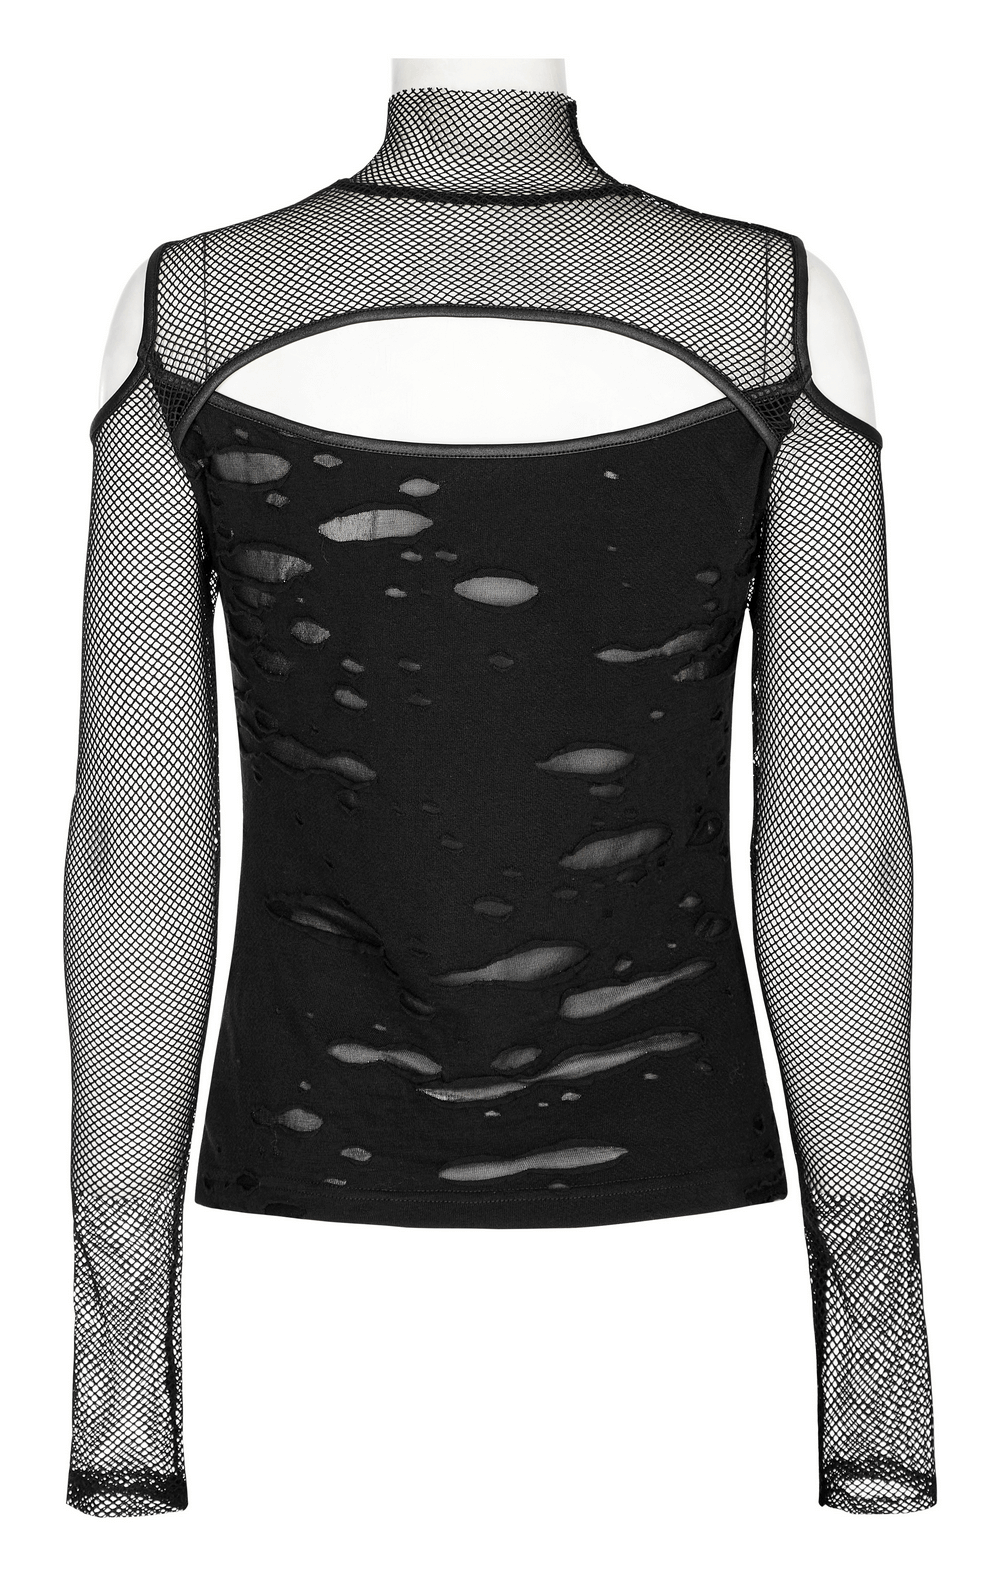 Women's Asymmetrical Punk Mesh Layered Top With Hollow Shoulders - HARD'N'HEAVY